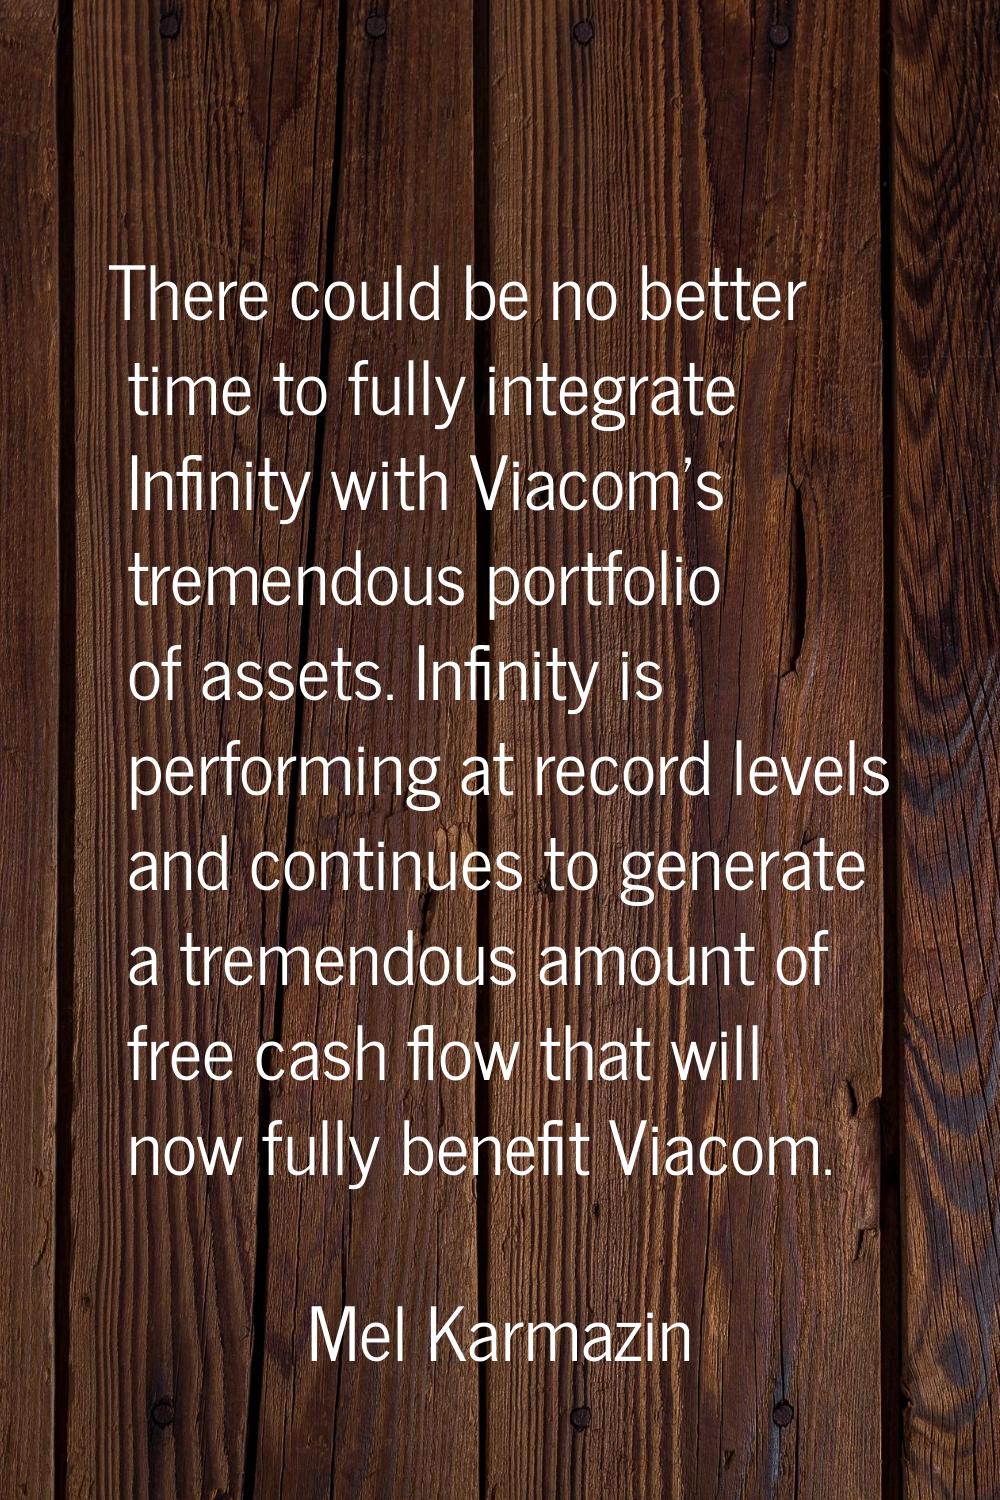 There could be no better time to fully integrate Infinity with Viacom's tremendous portfolio of ass